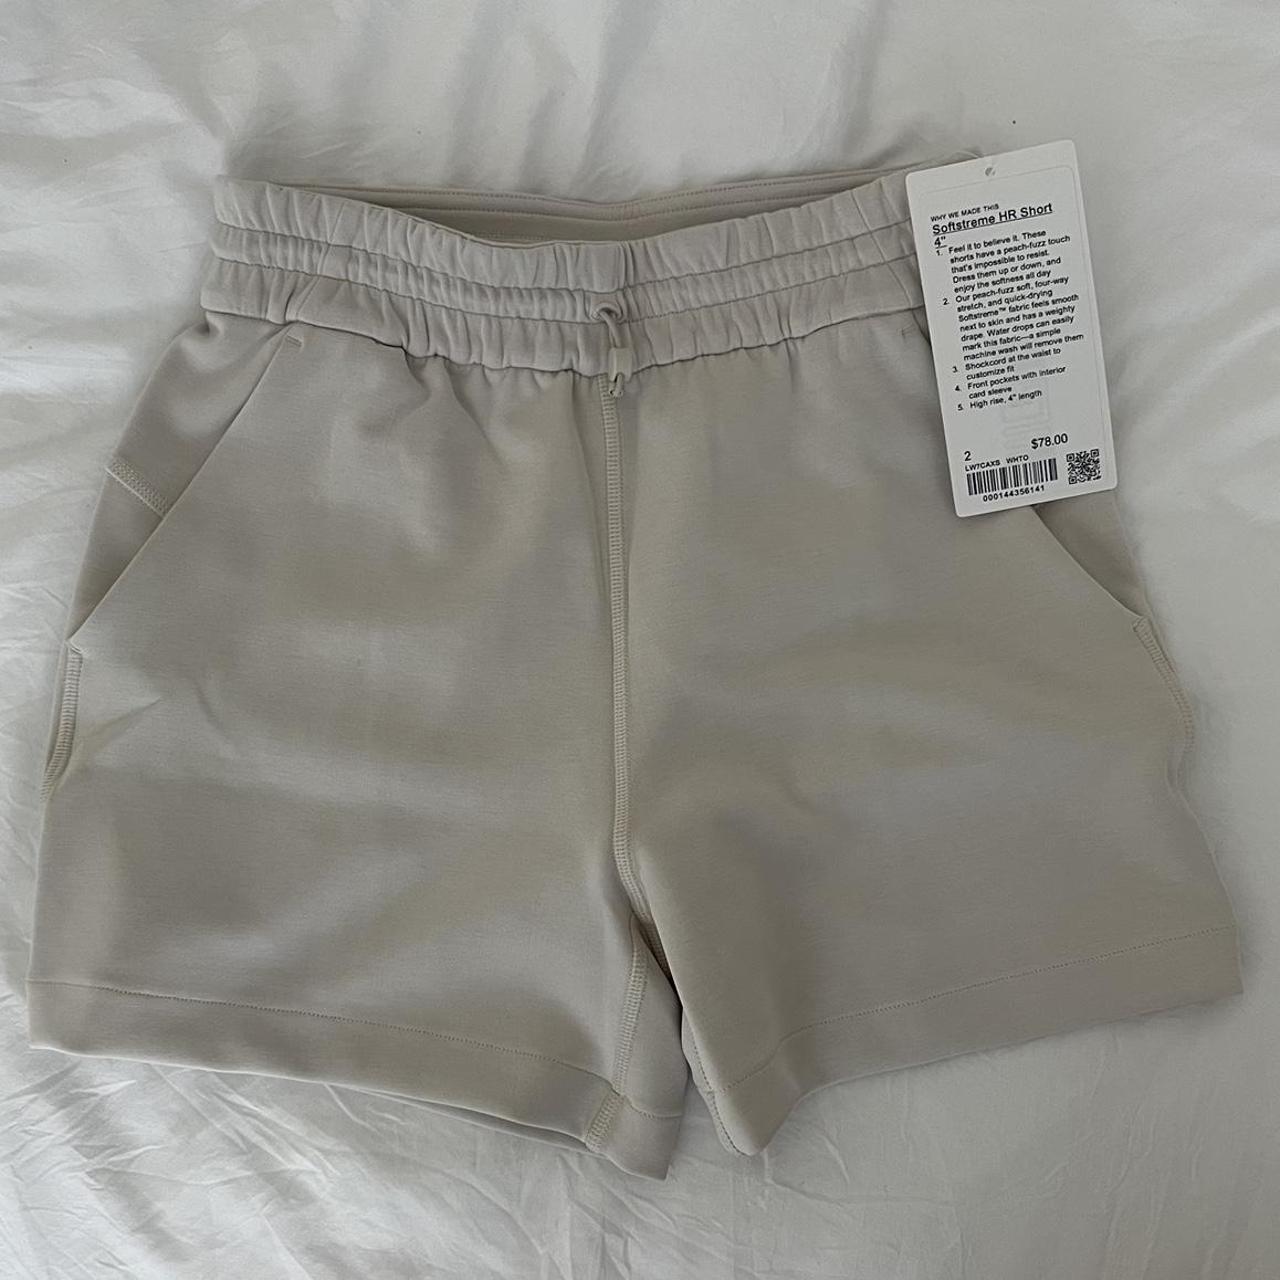 softstreme HR short size 4 versus relaxed shorts size 2 and 4 : r